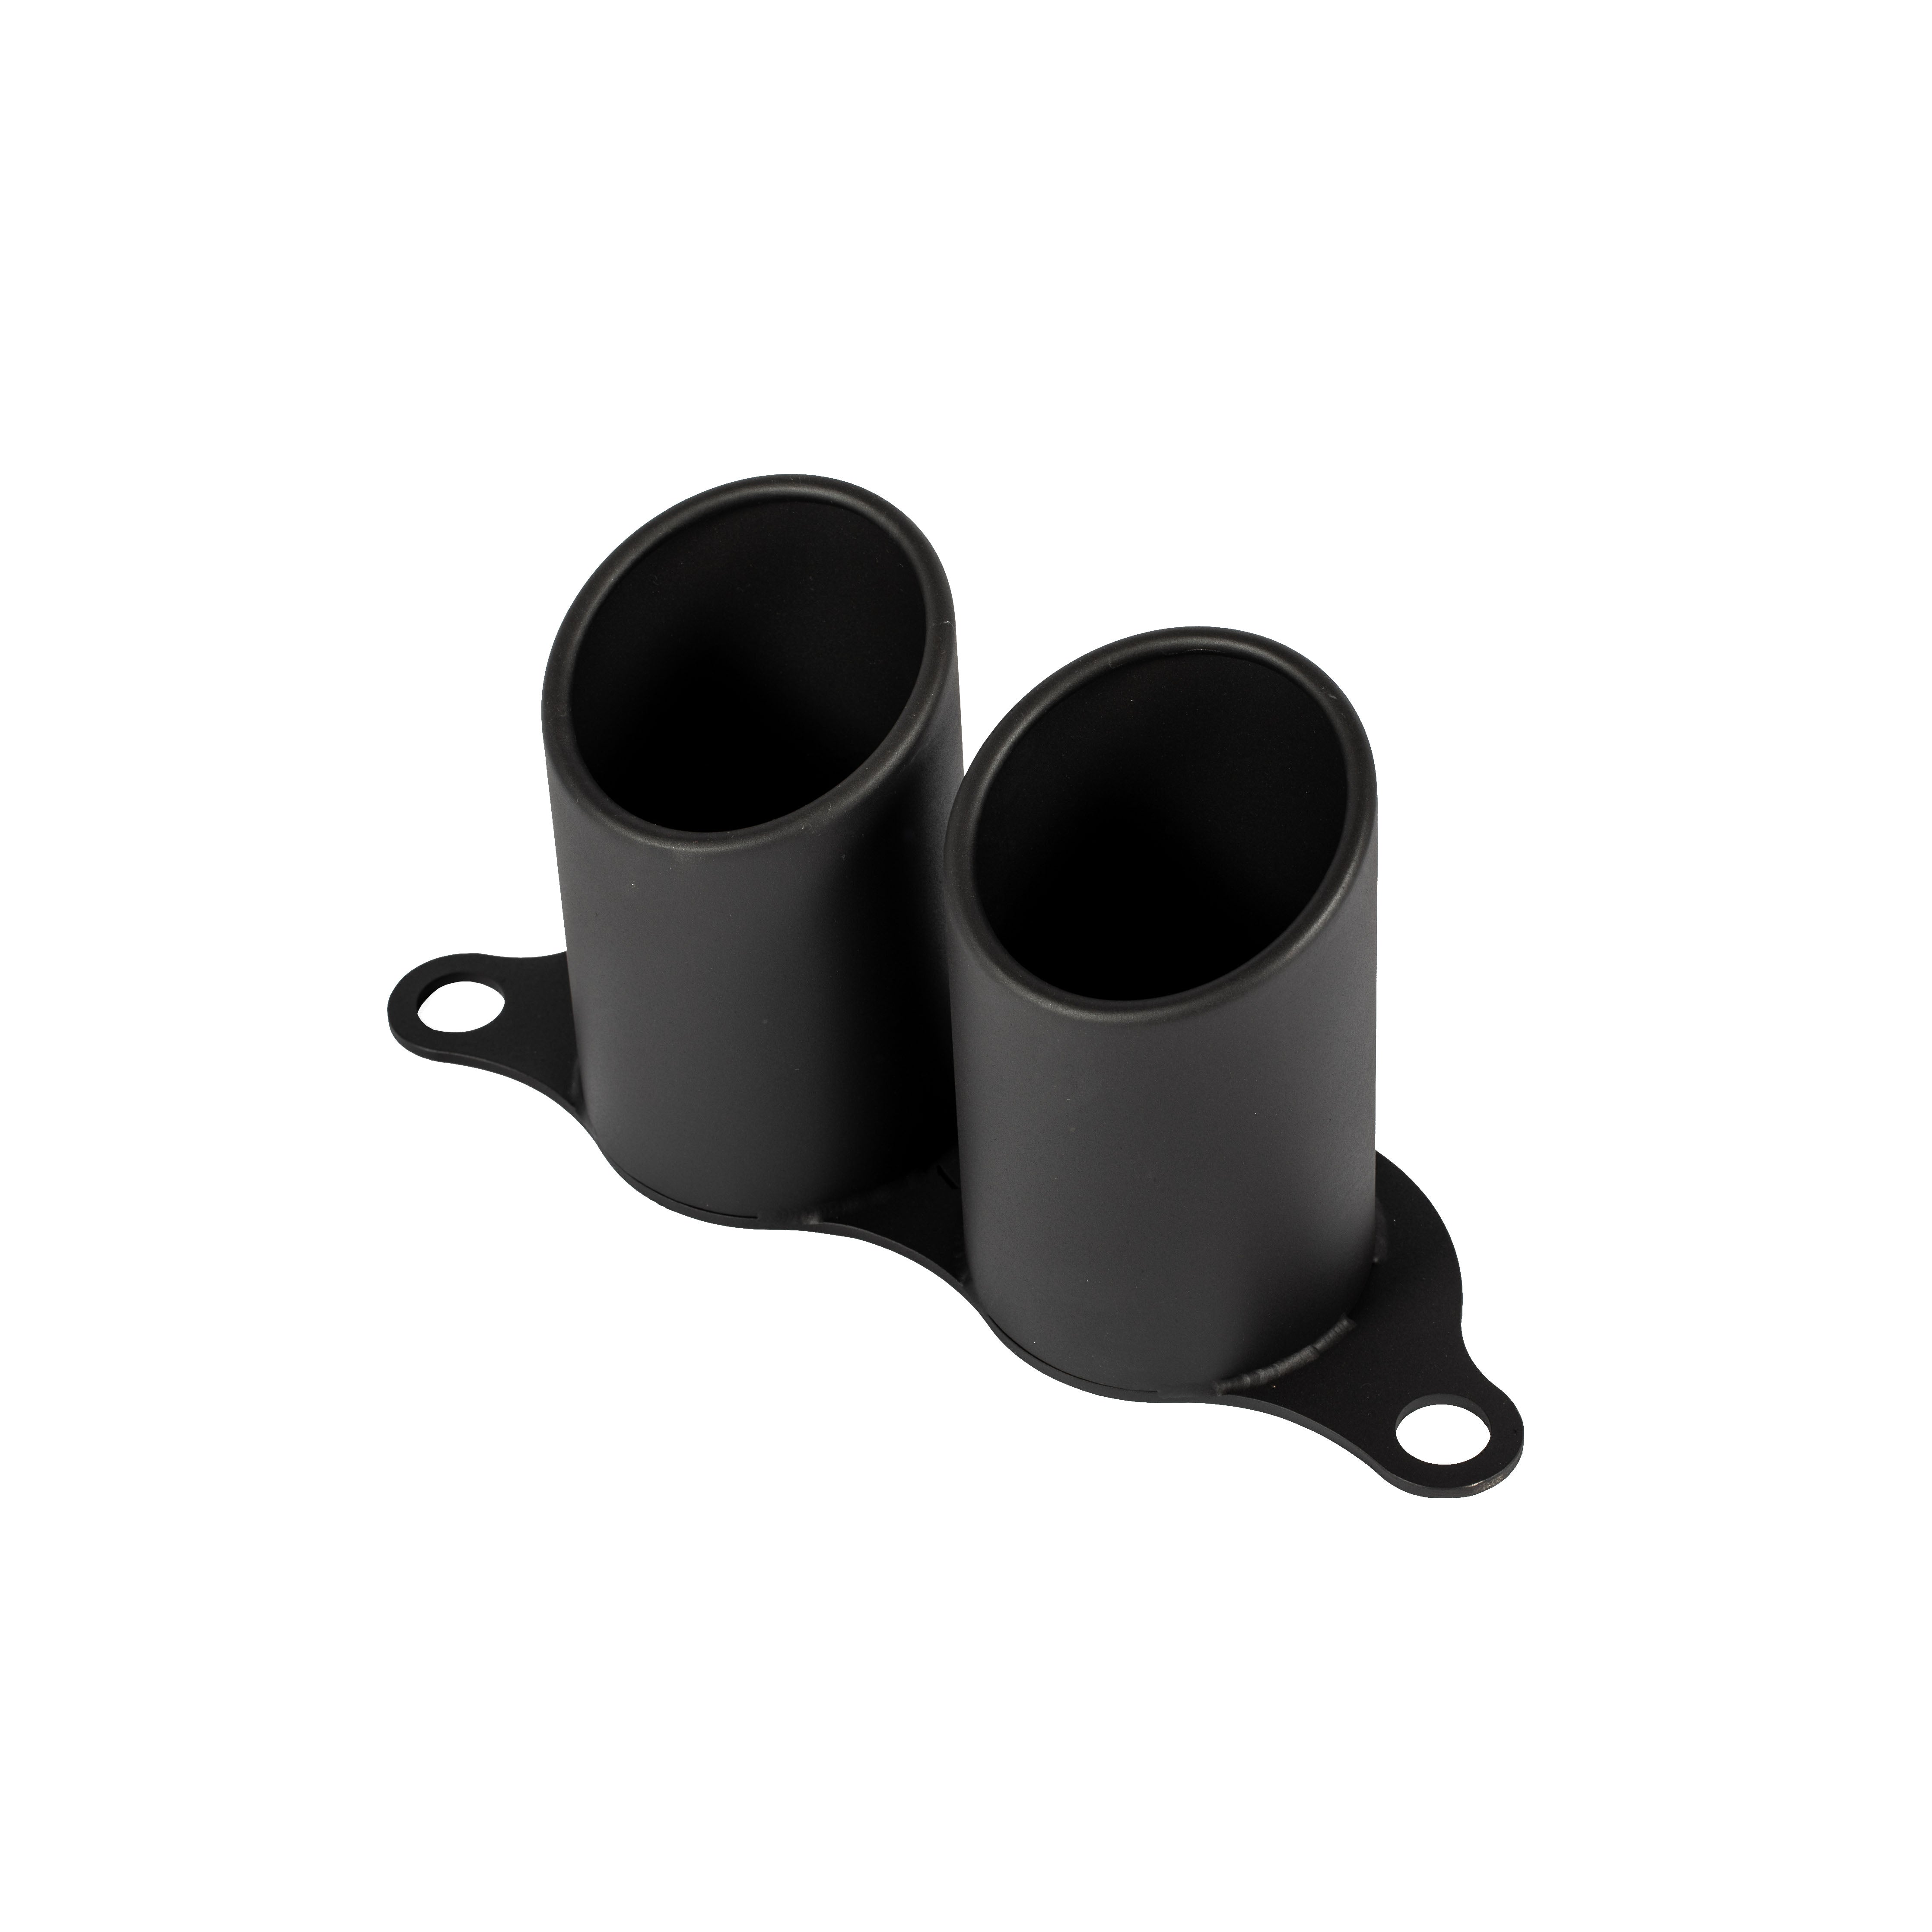 INCONEL TIPS (BLACK COATED)